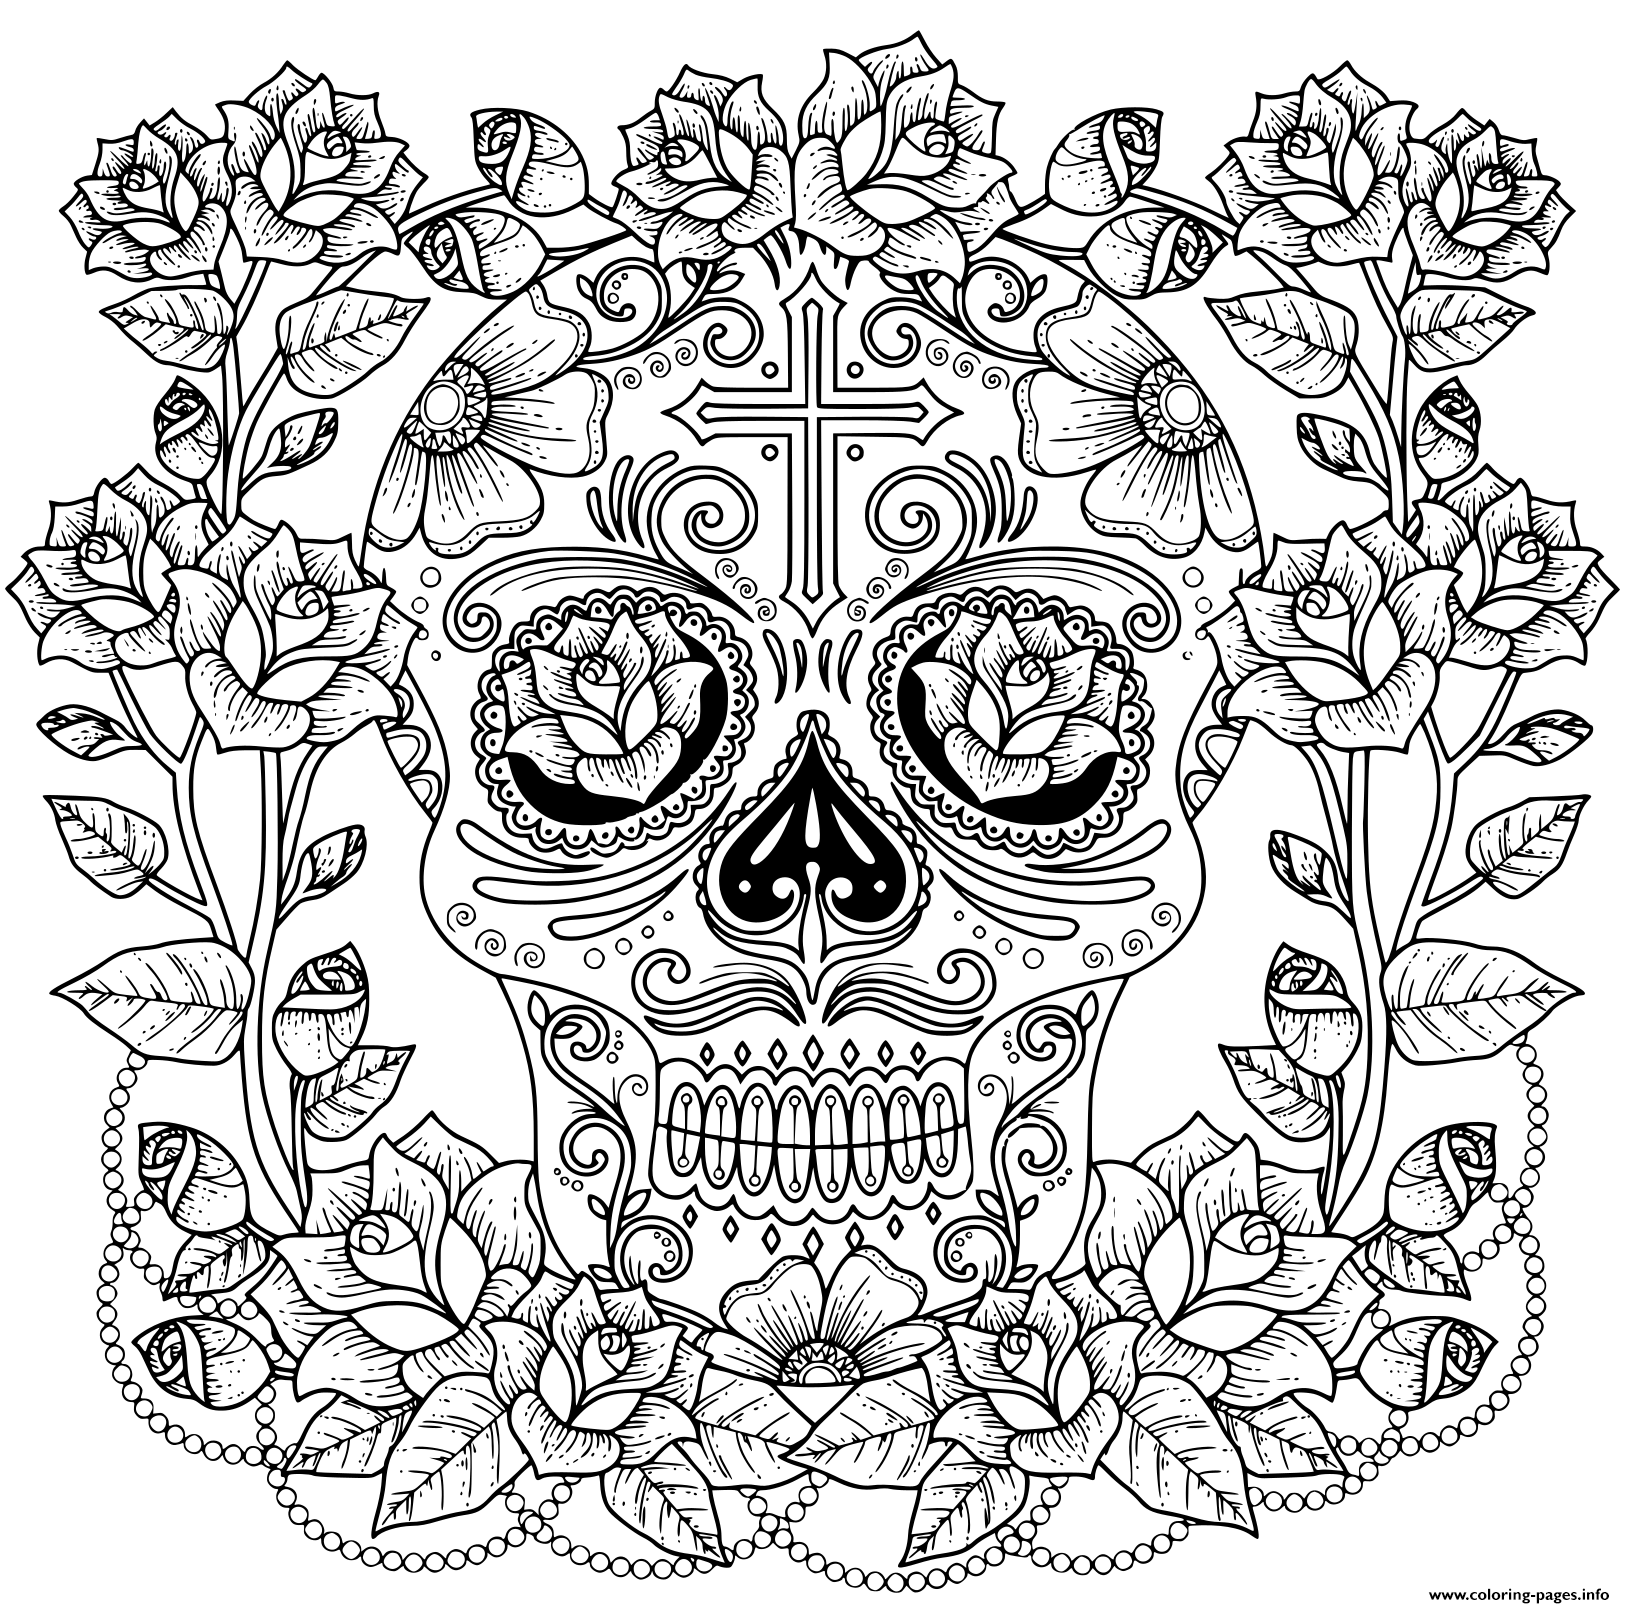 Fantastic Magnificent Skull Of Roses And Cross Model Anti Stress coloring